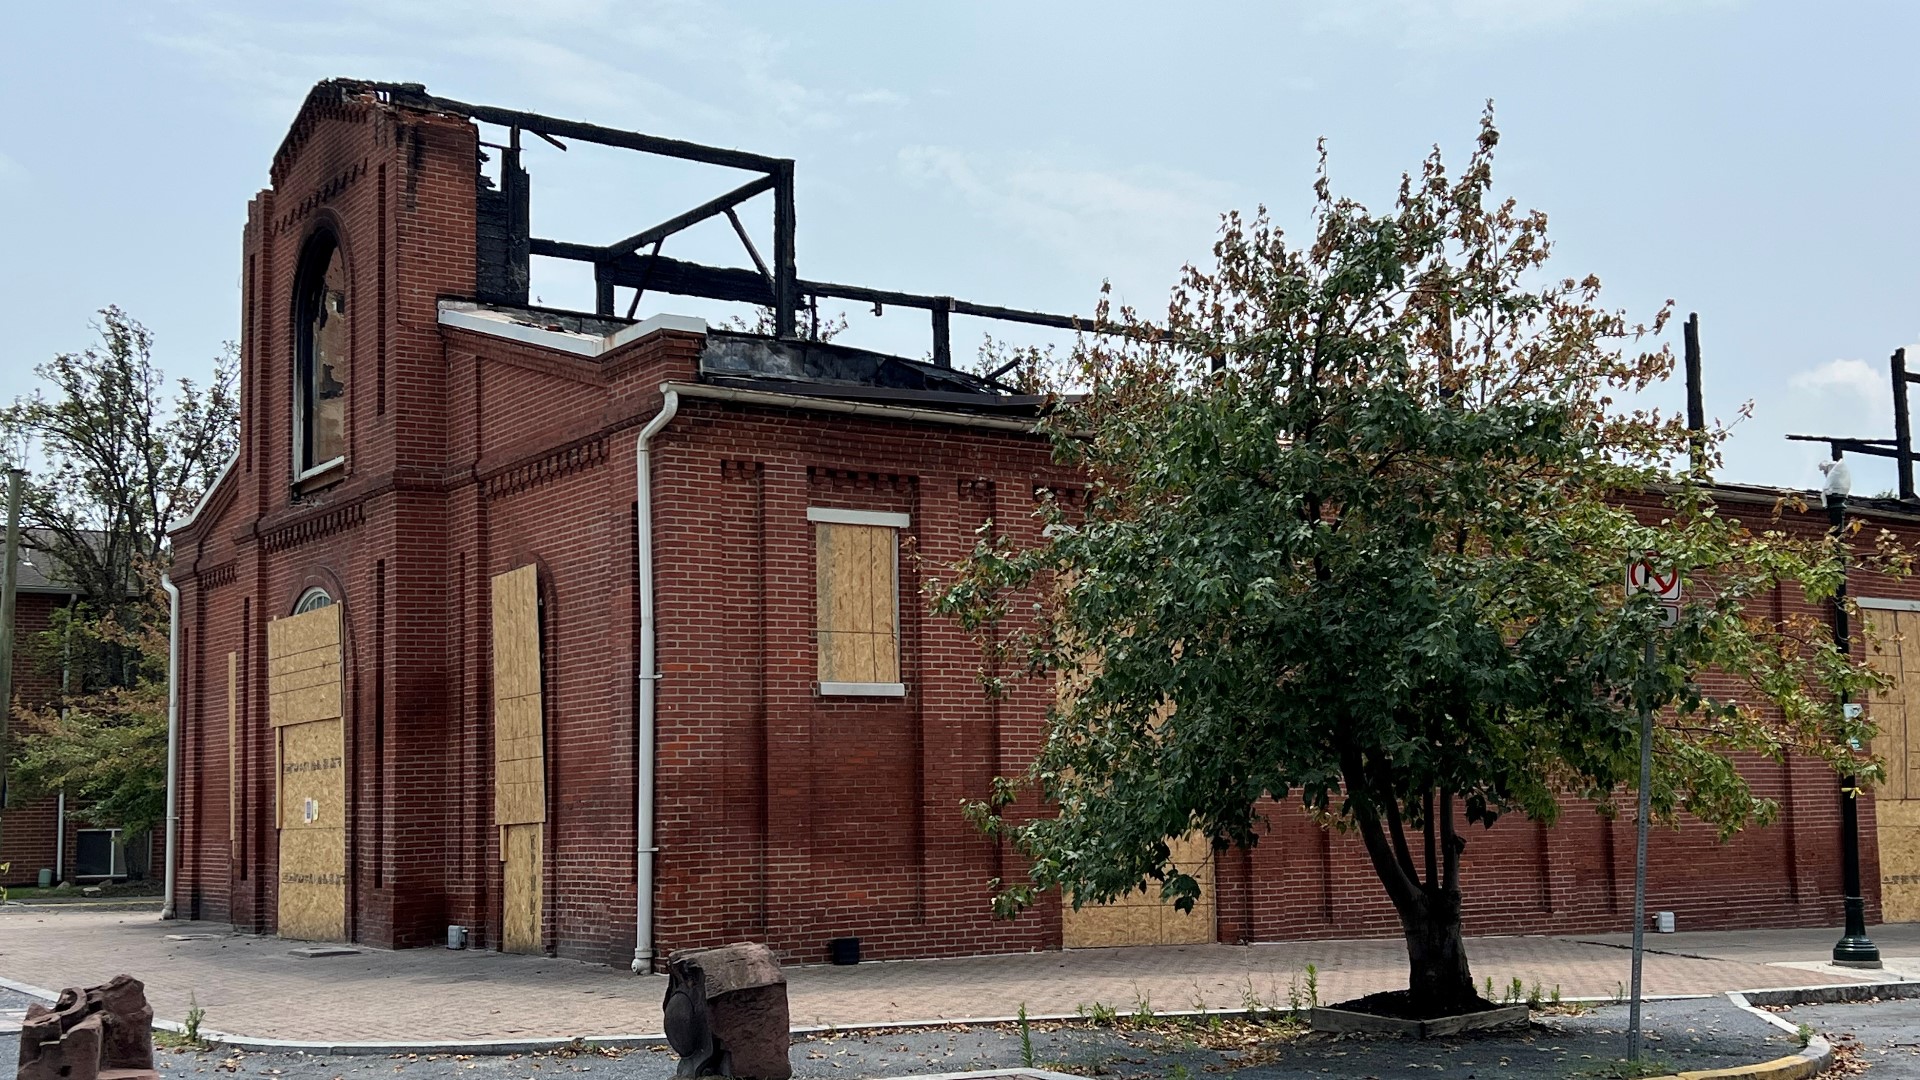 The July 10 fire severely damaged the market's historic brick building, displacing more than 20 vendors.